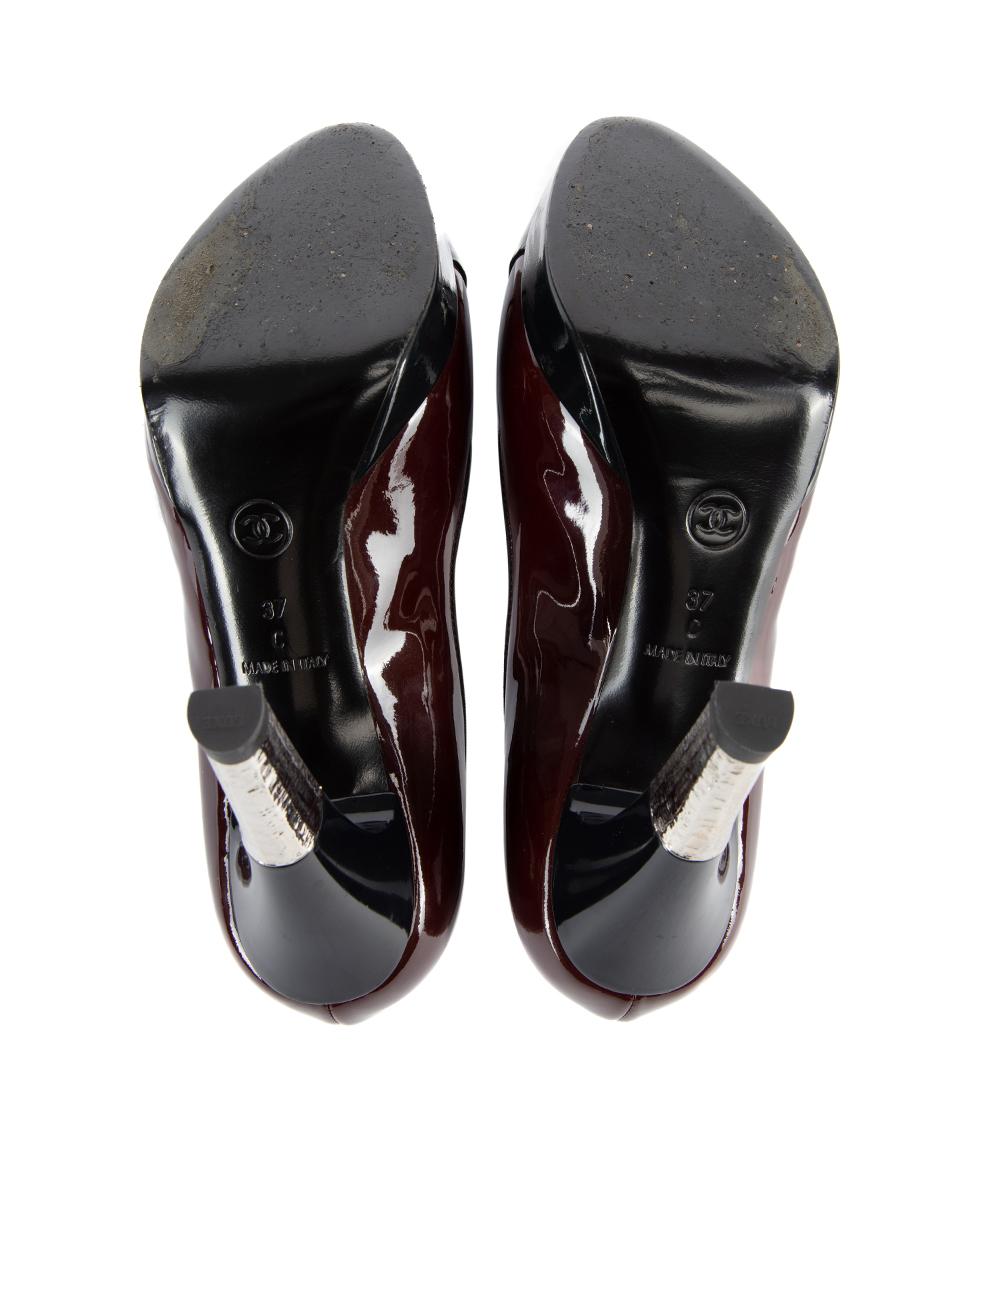 Chanel Women's Burgundy Patent Leather Metal Accent Heel For Sale 1